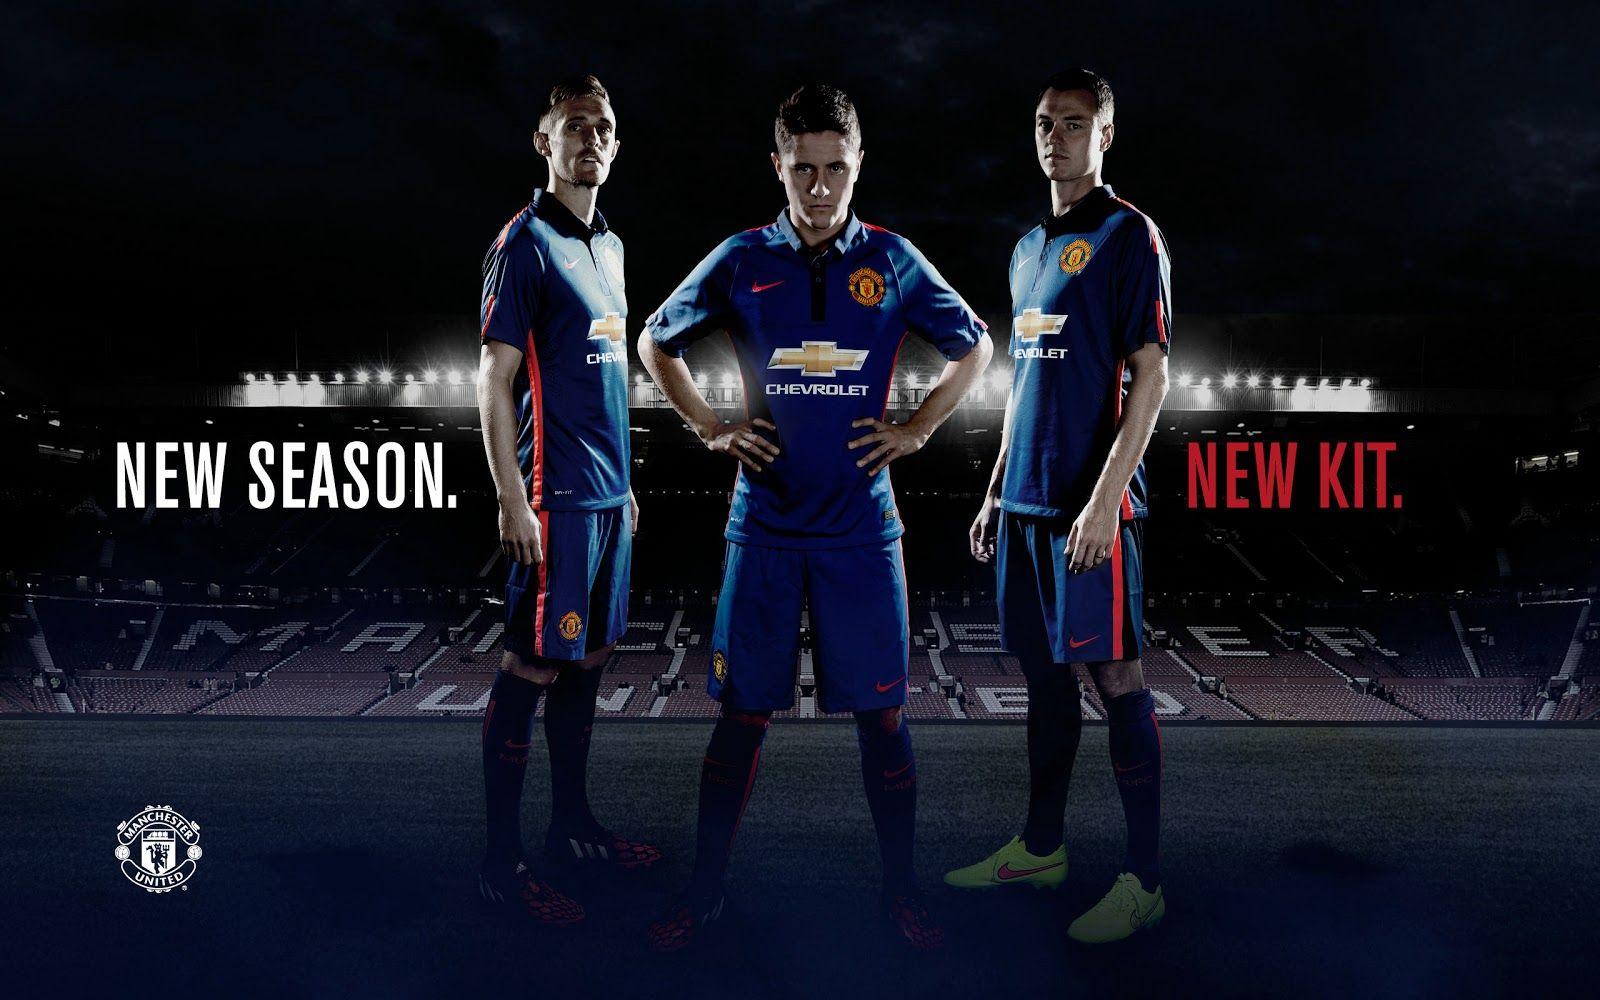 Manchester United Wallpapers Nike Wallpaper Cave